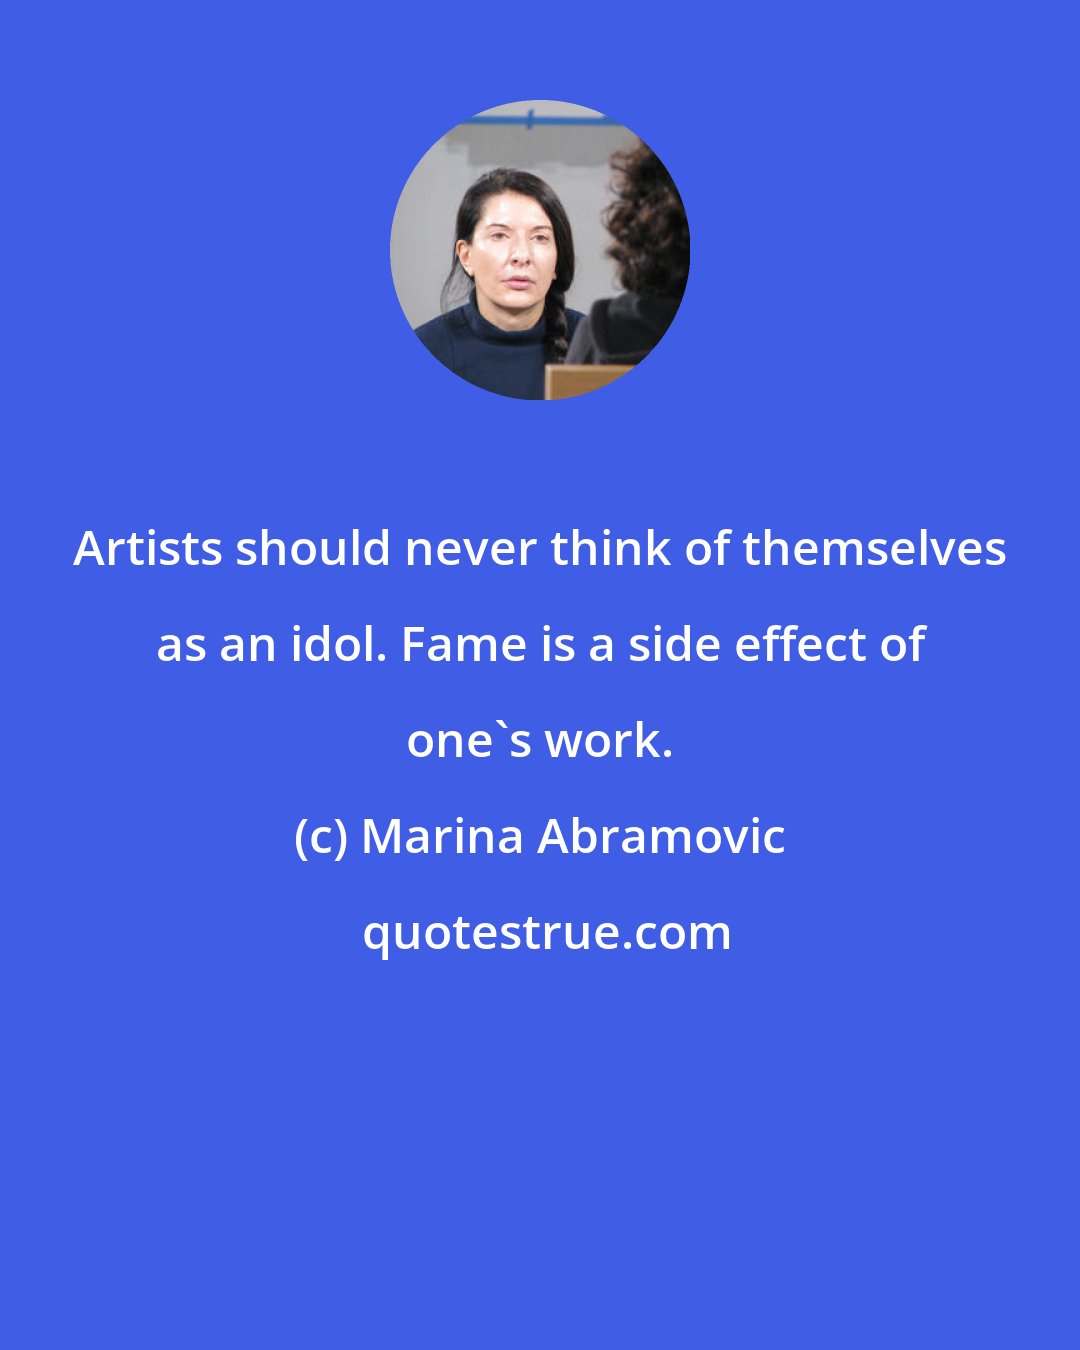 Marina Abramovic: Artists should never think of themselves as an idol. Fame is a side effect of one's work.